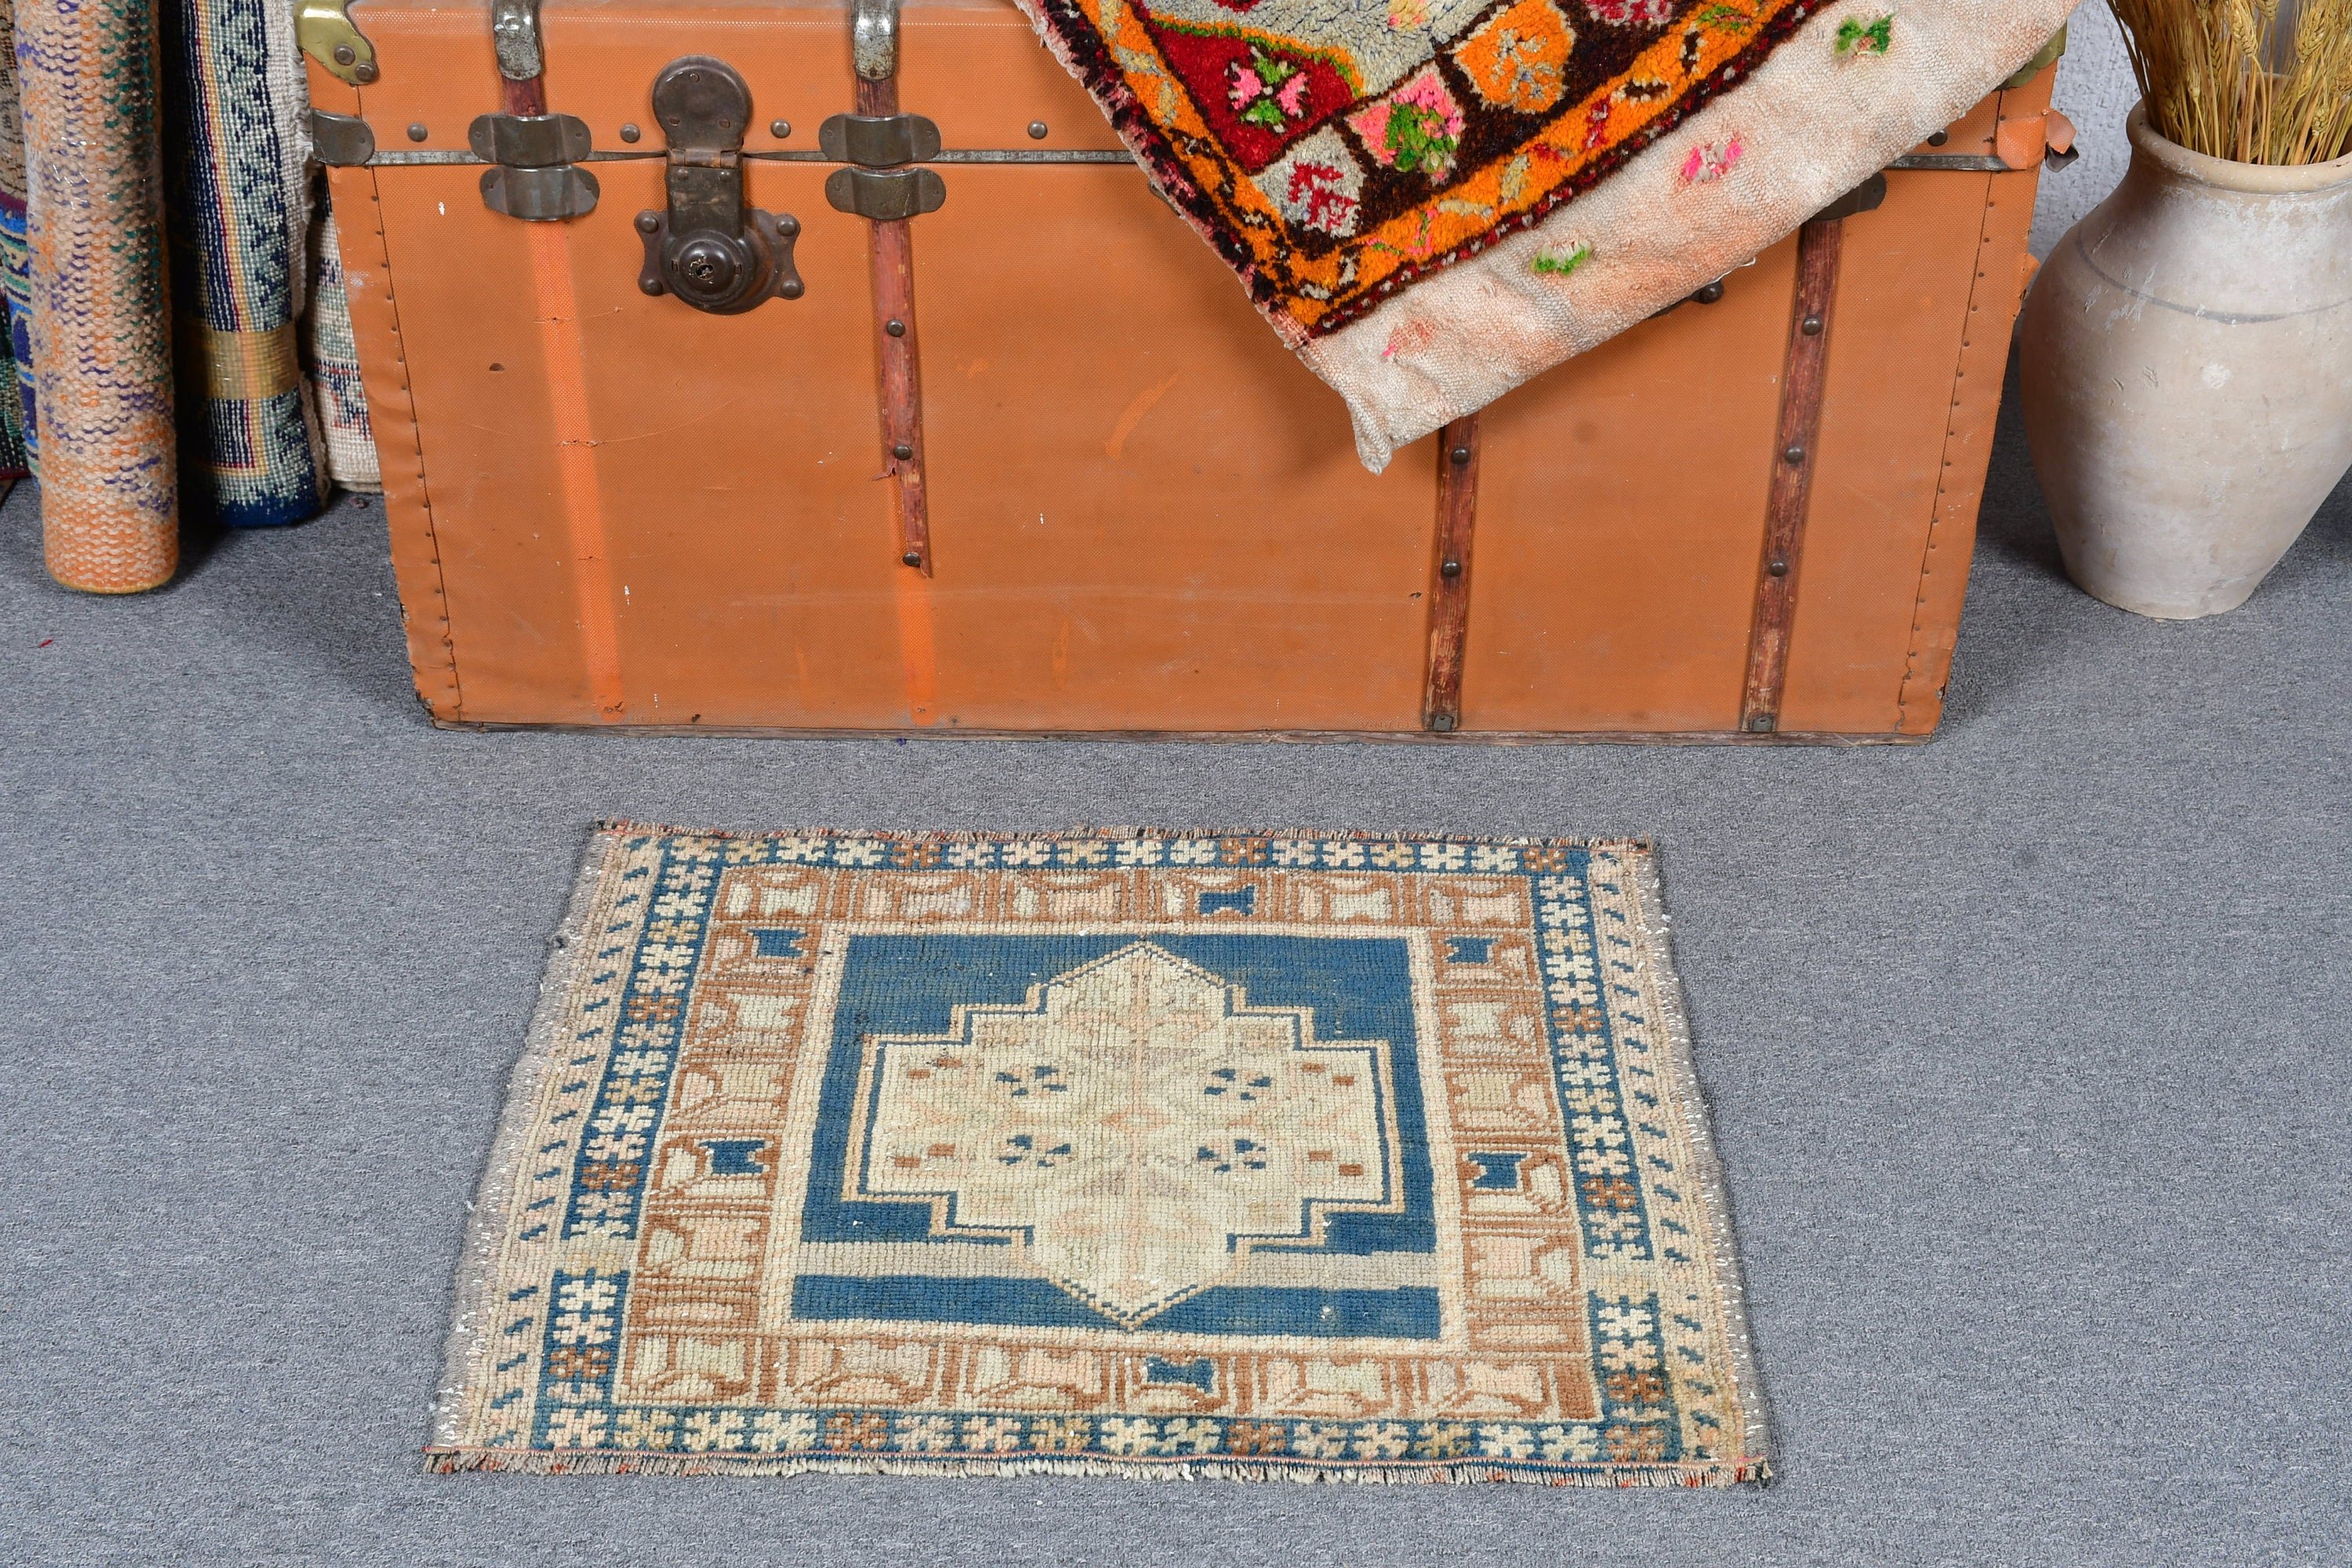 Rugs for Car Mat, Vintage Rug, Turkish Rug, Antique Rugs, Cool Rug, Brown Moroccan Rug, 1.7x2.2 ft Small Rugs, Bedroom Rug, Kitchen Rug